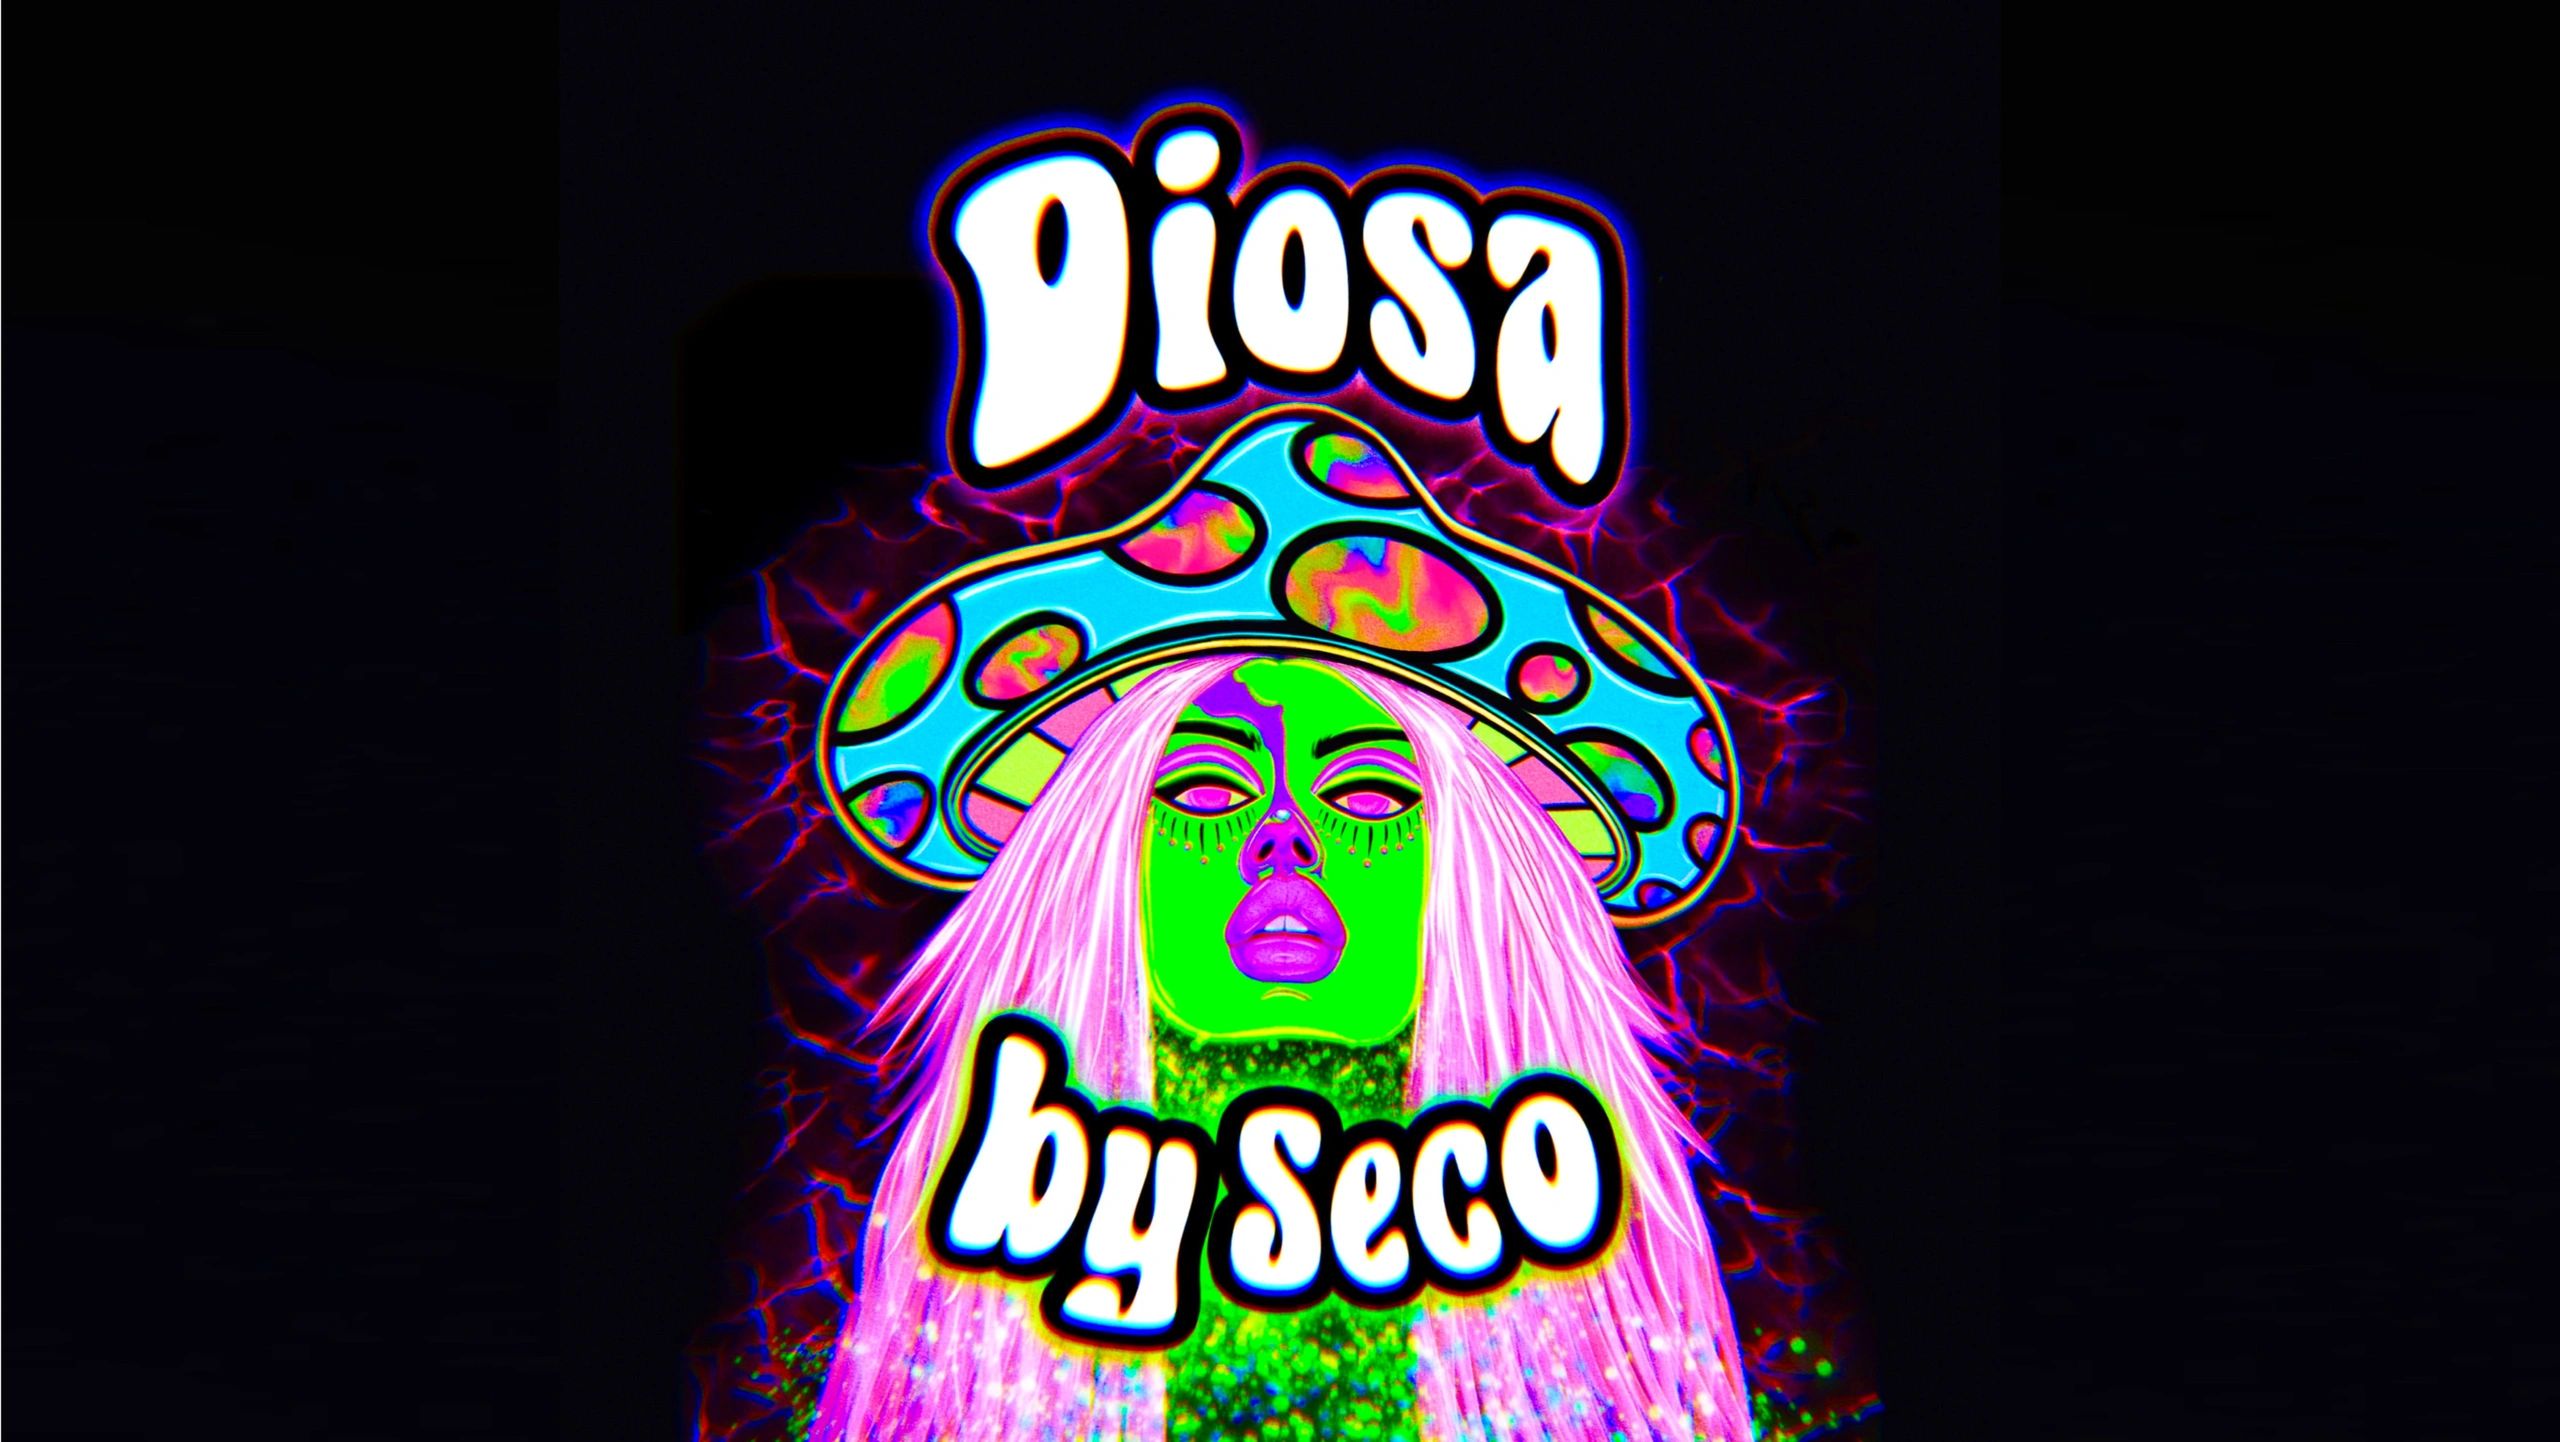 Diosa By Seco